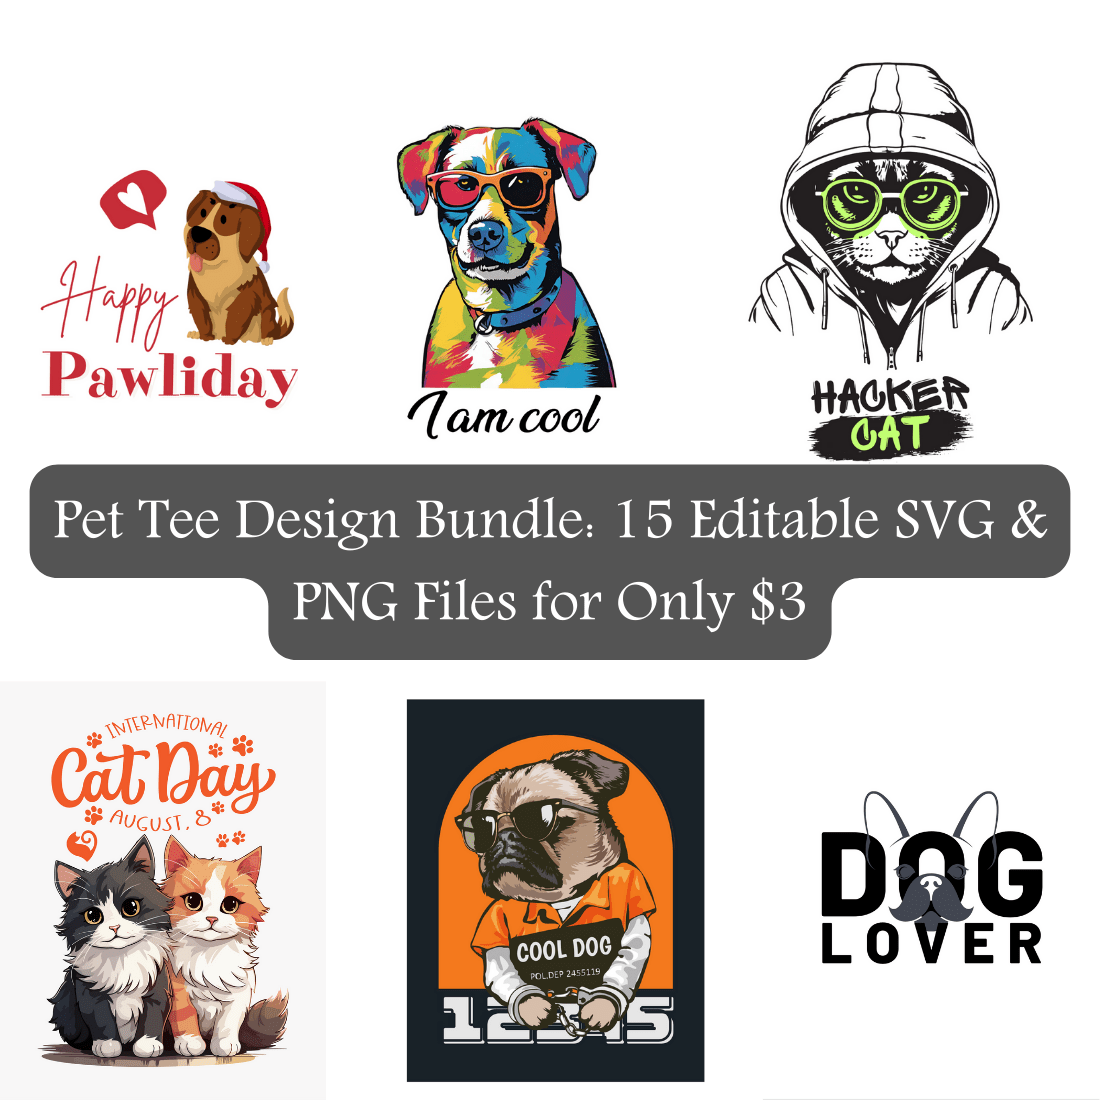 Pet Tee Design Bundle: 15 Editable SVG & PNG Files for Only $3 cover image.